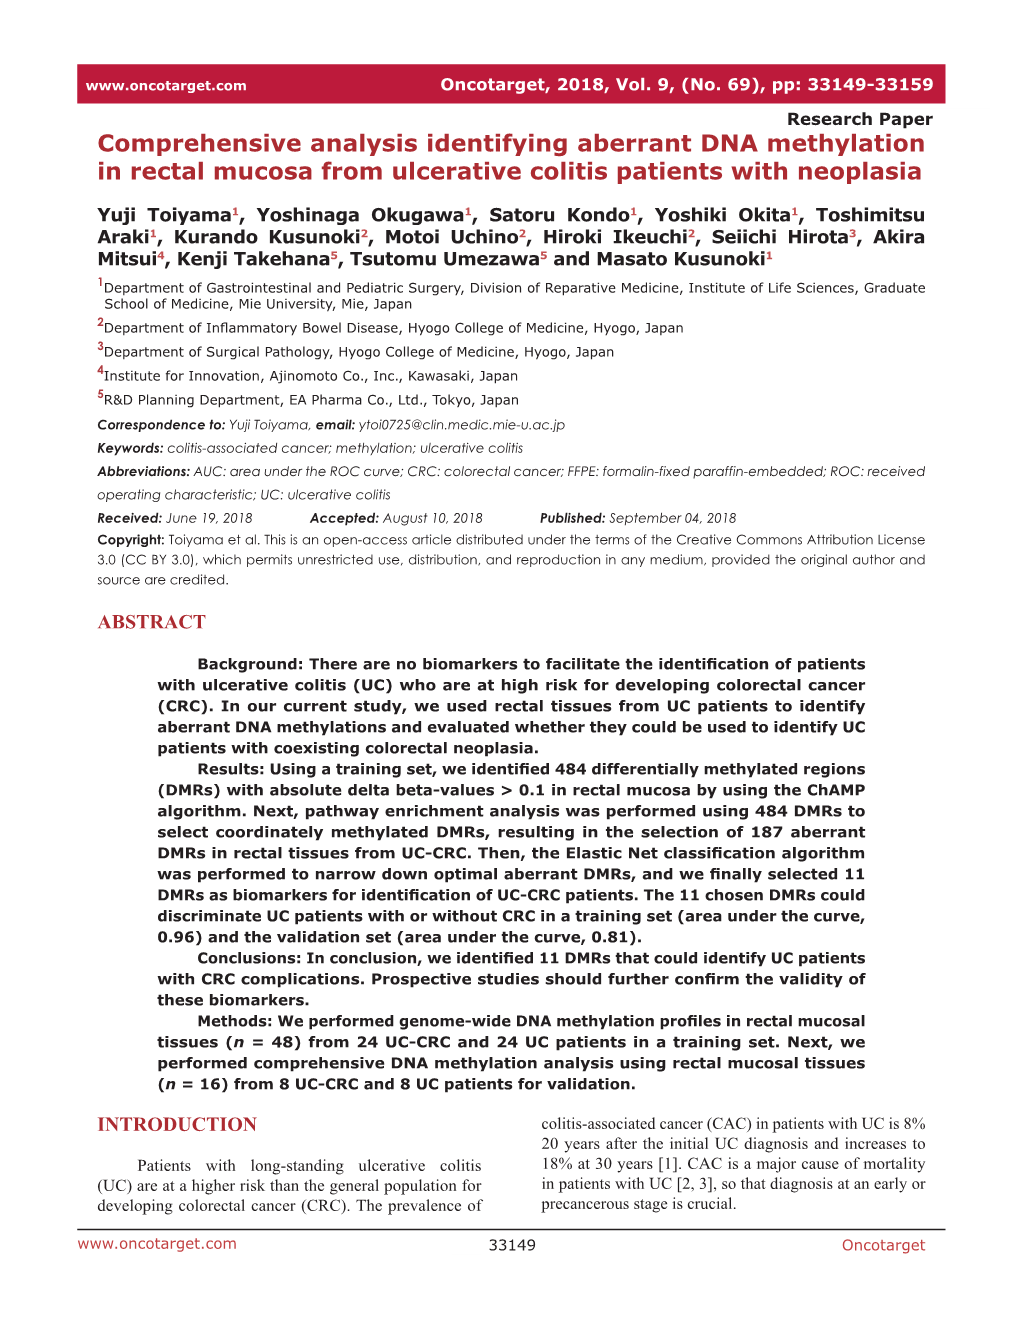 Comprehensive Analysis Identifying Aberrant DNA Methylation in Rectal Mucosa from Ulcerative Colitis Patients with Neoplasia